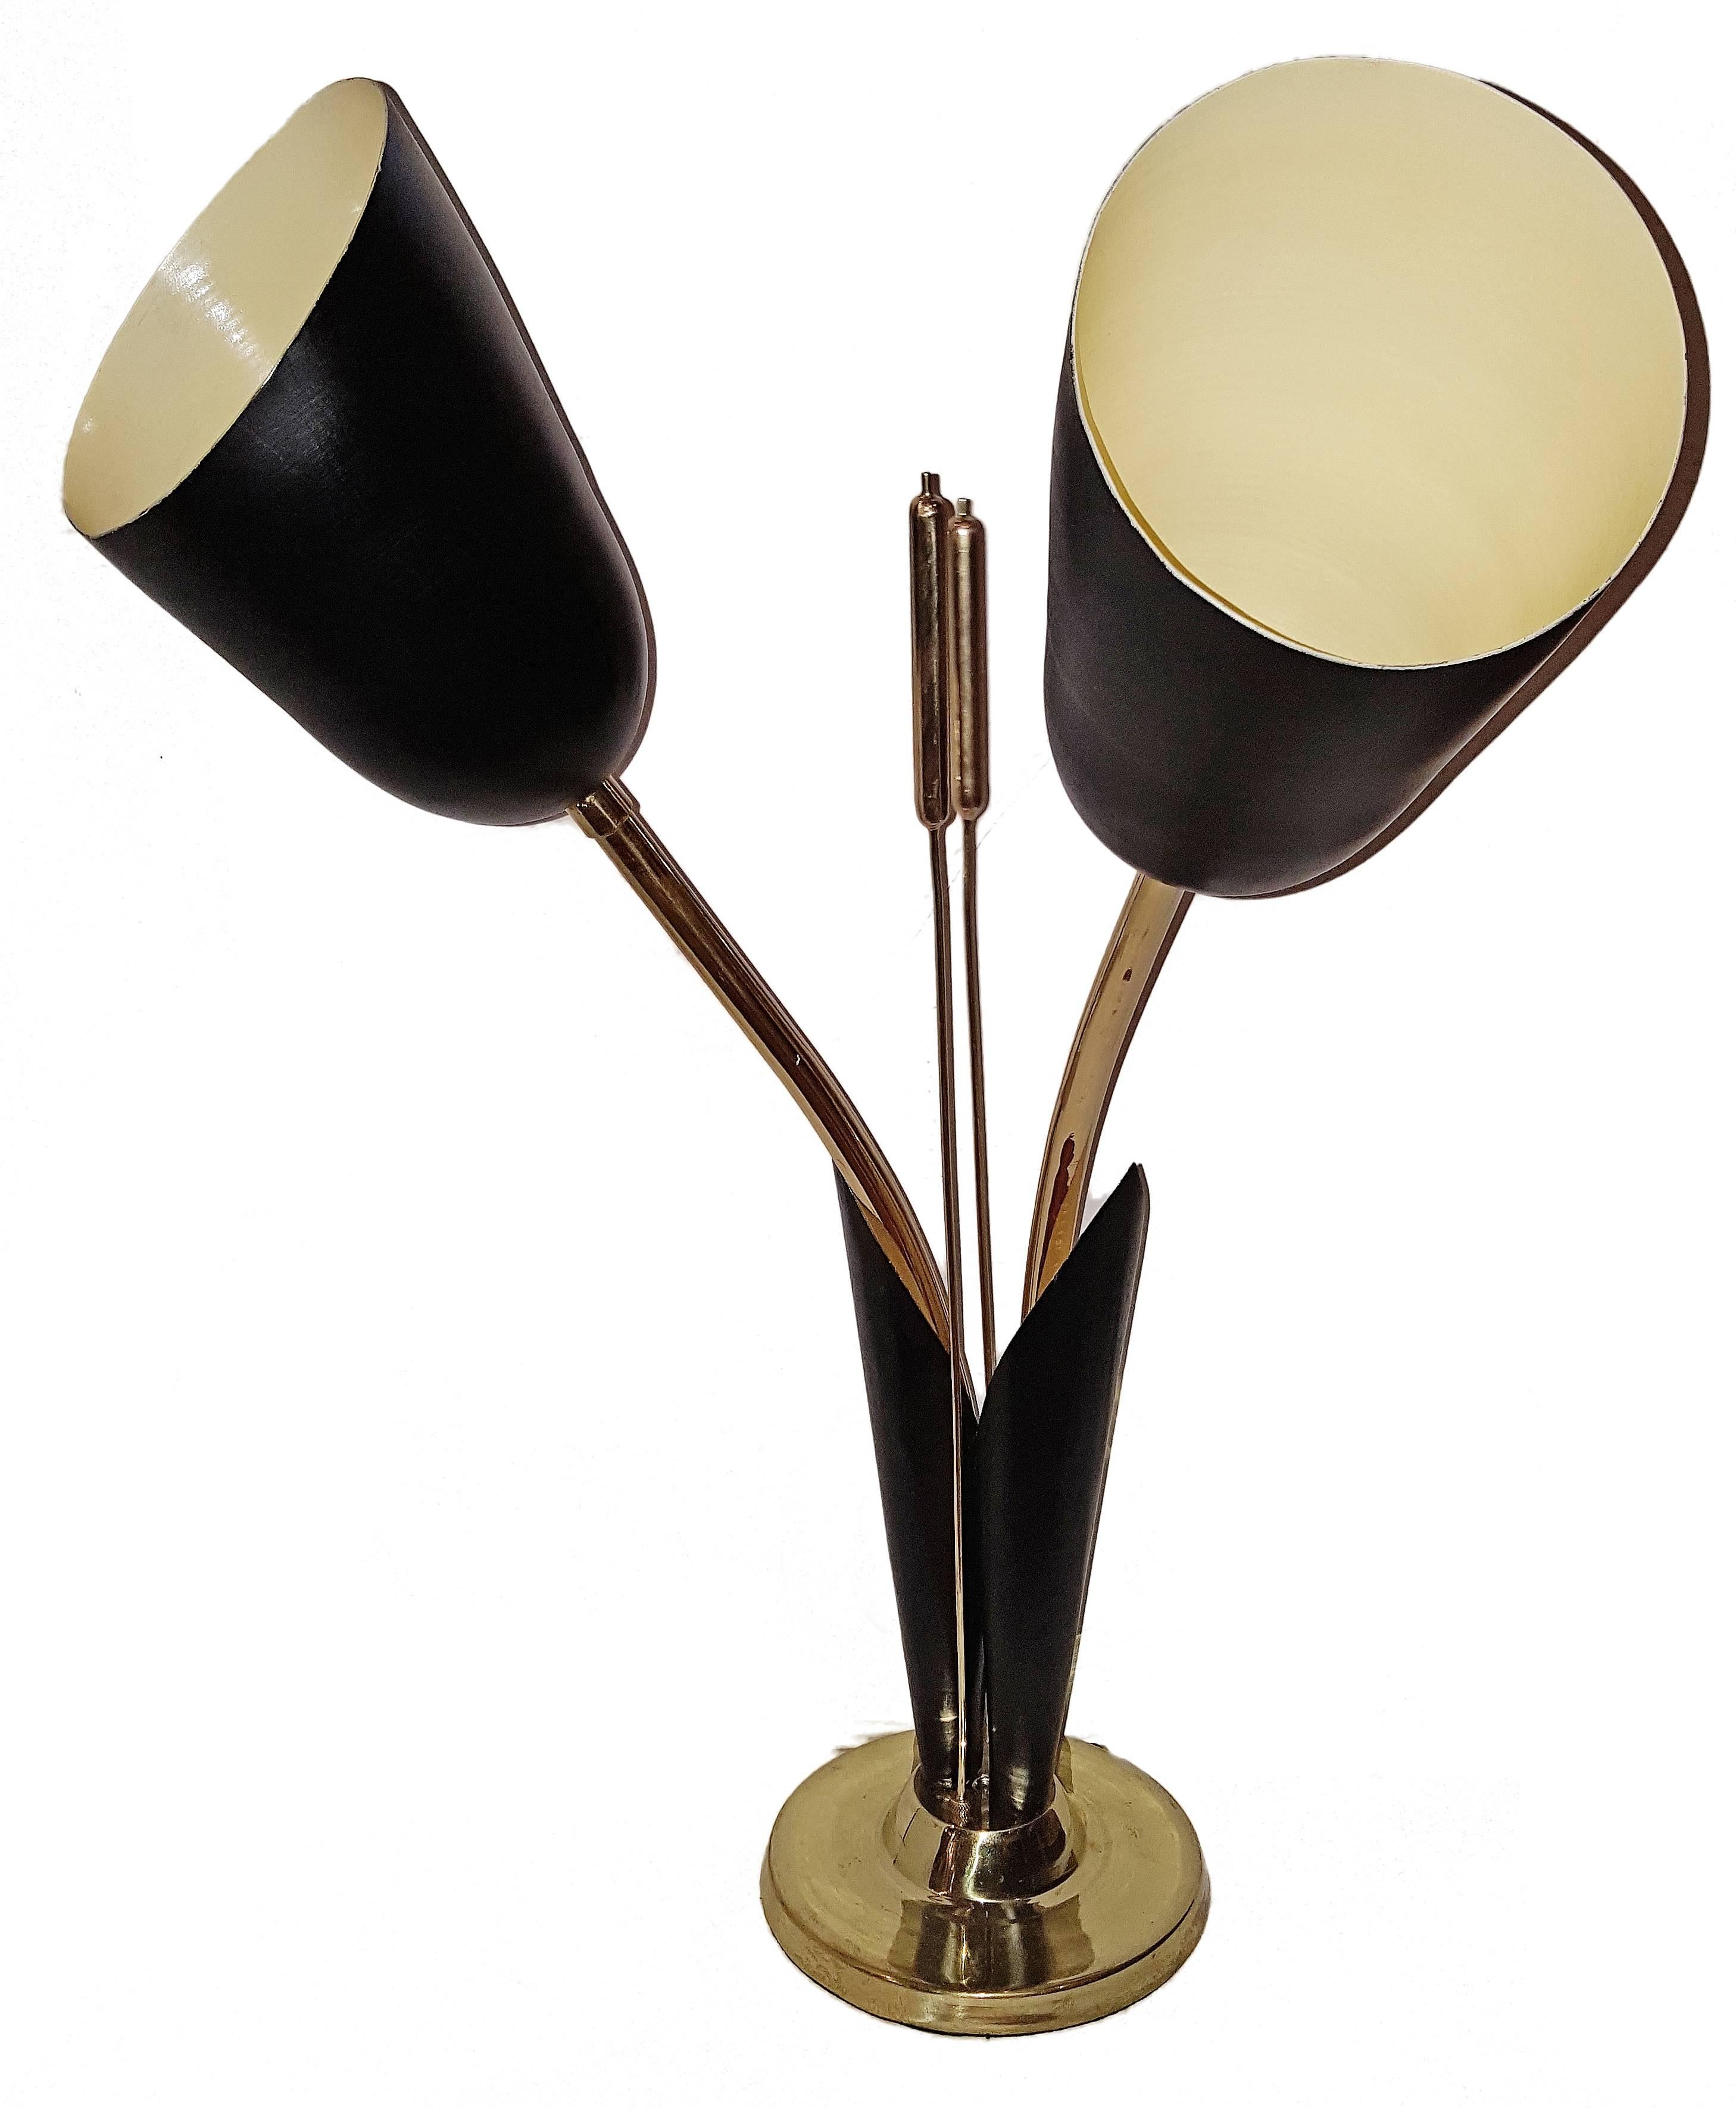 Pair of 1960s Italian gilt lamps with black tole shades, cat tail.
Measures: 27